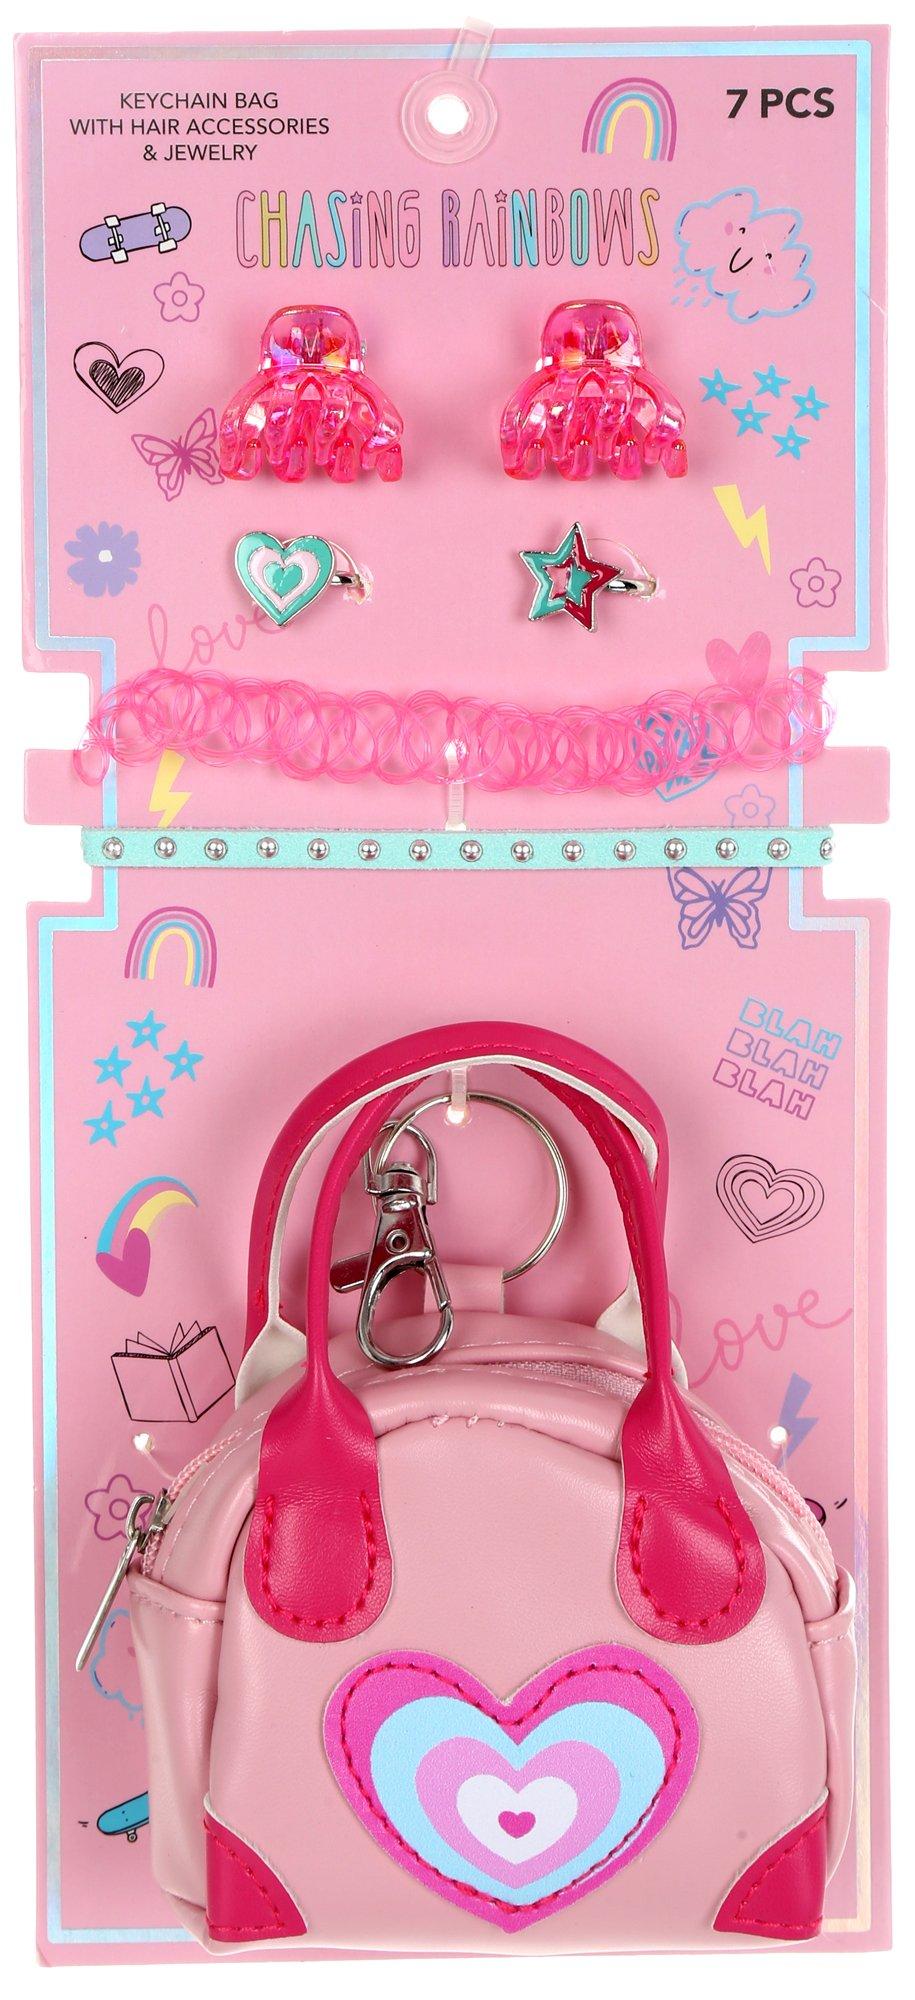 7 Pc Keychain Bag and Accessory Set